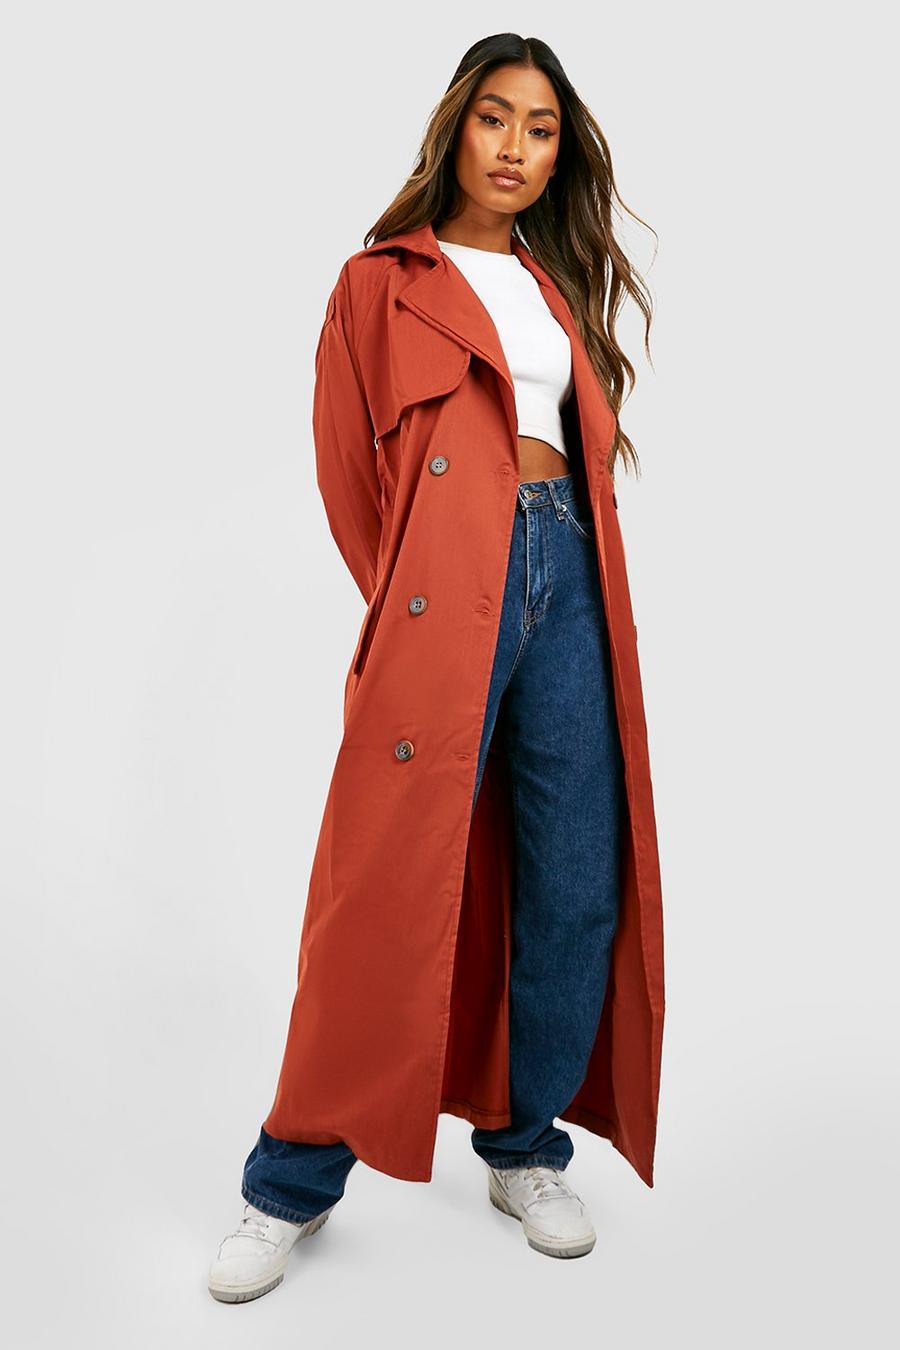 Rust orange Double Breasted Trench Coat